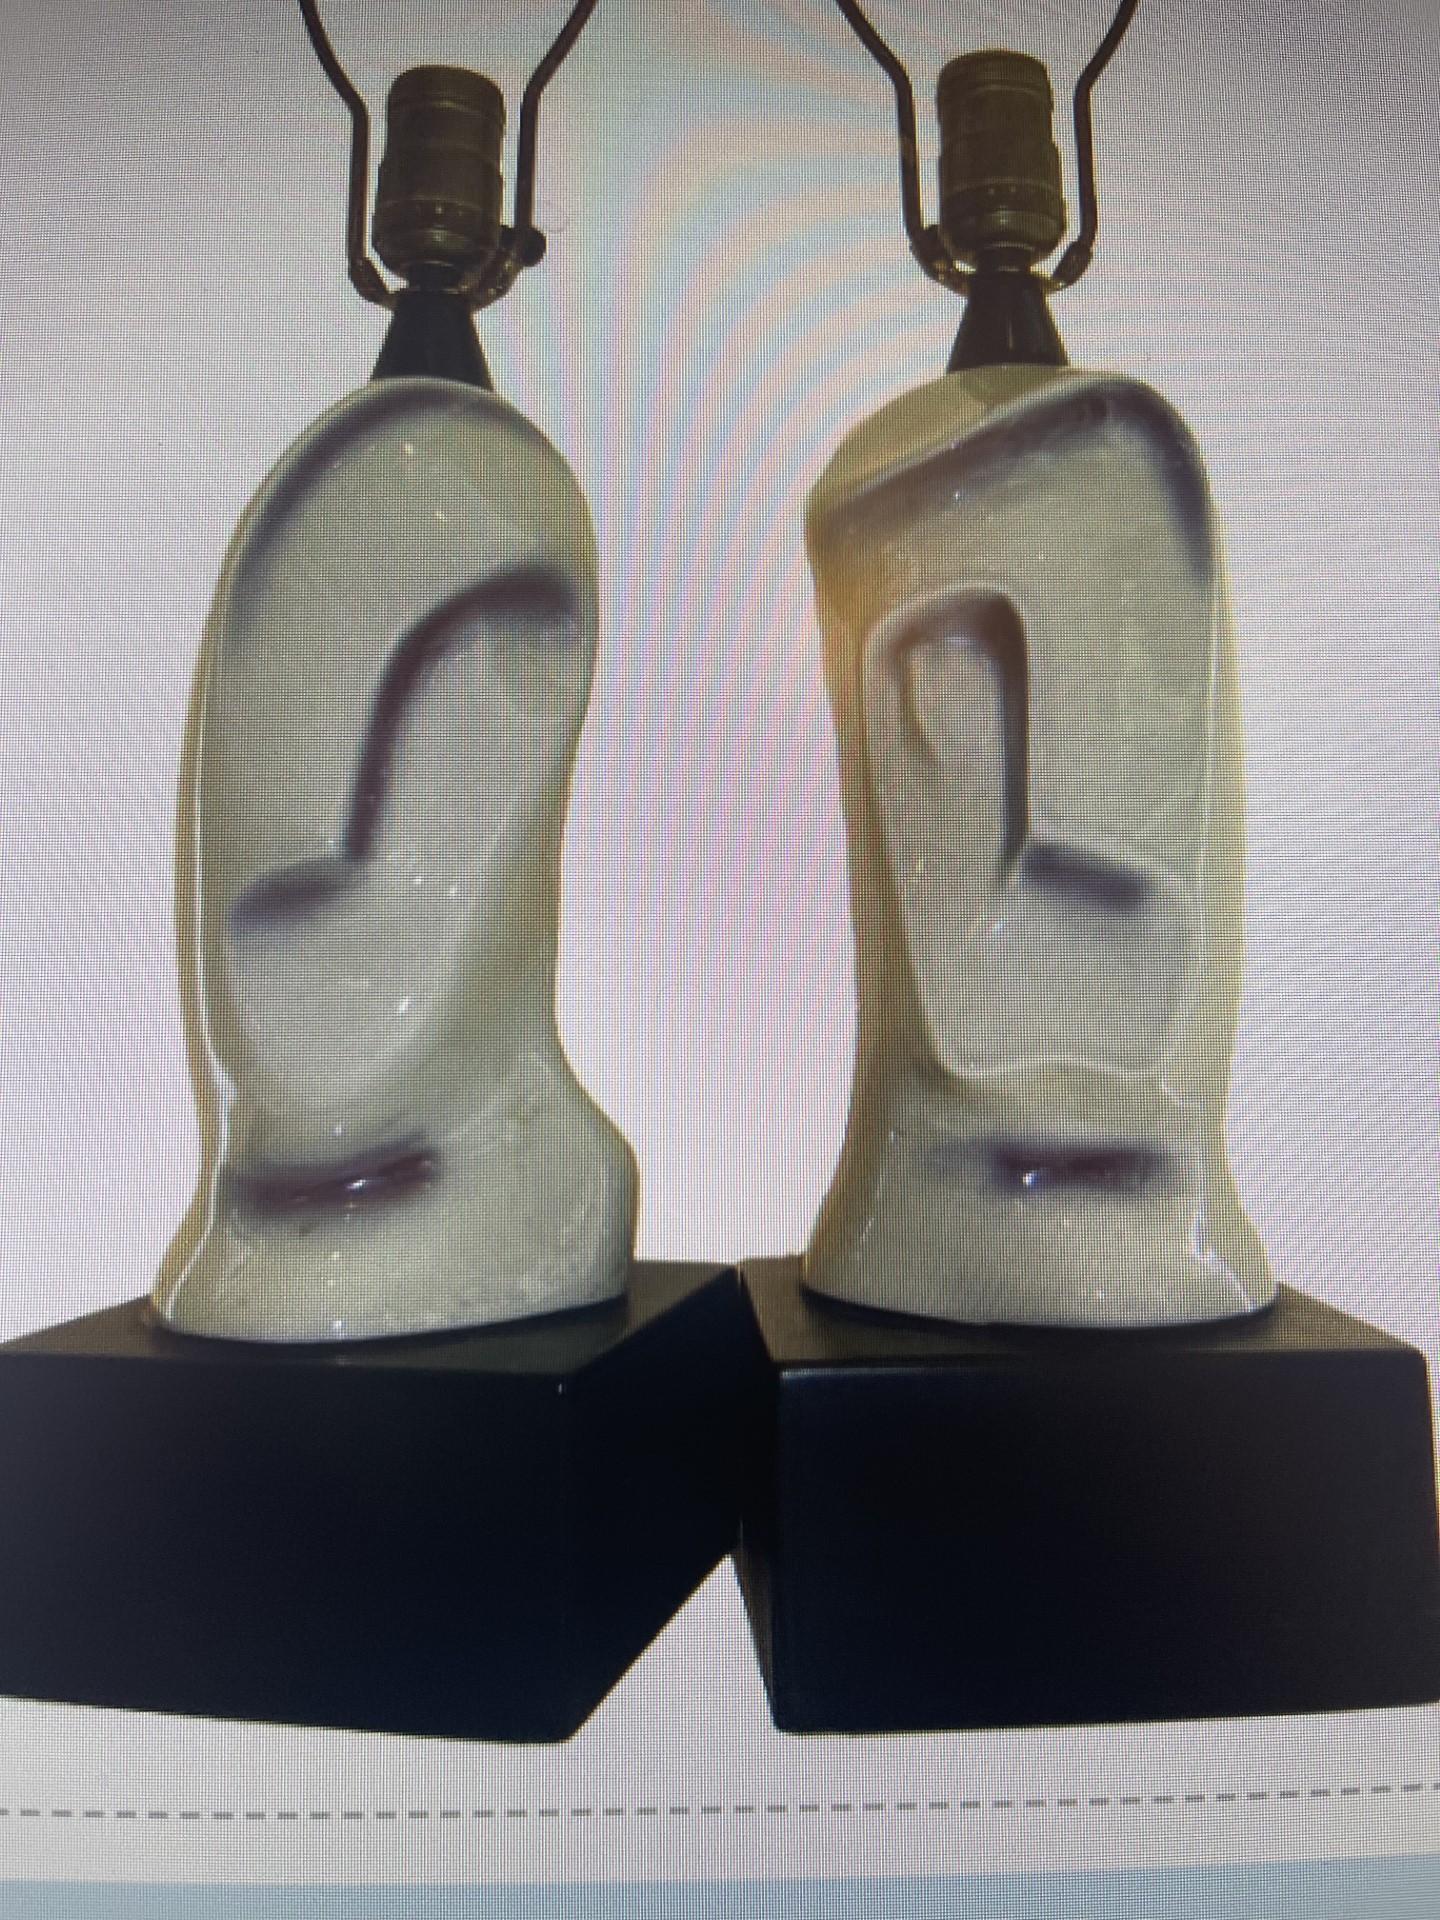 A rare find in this pair of hand sculptured Picasso style 